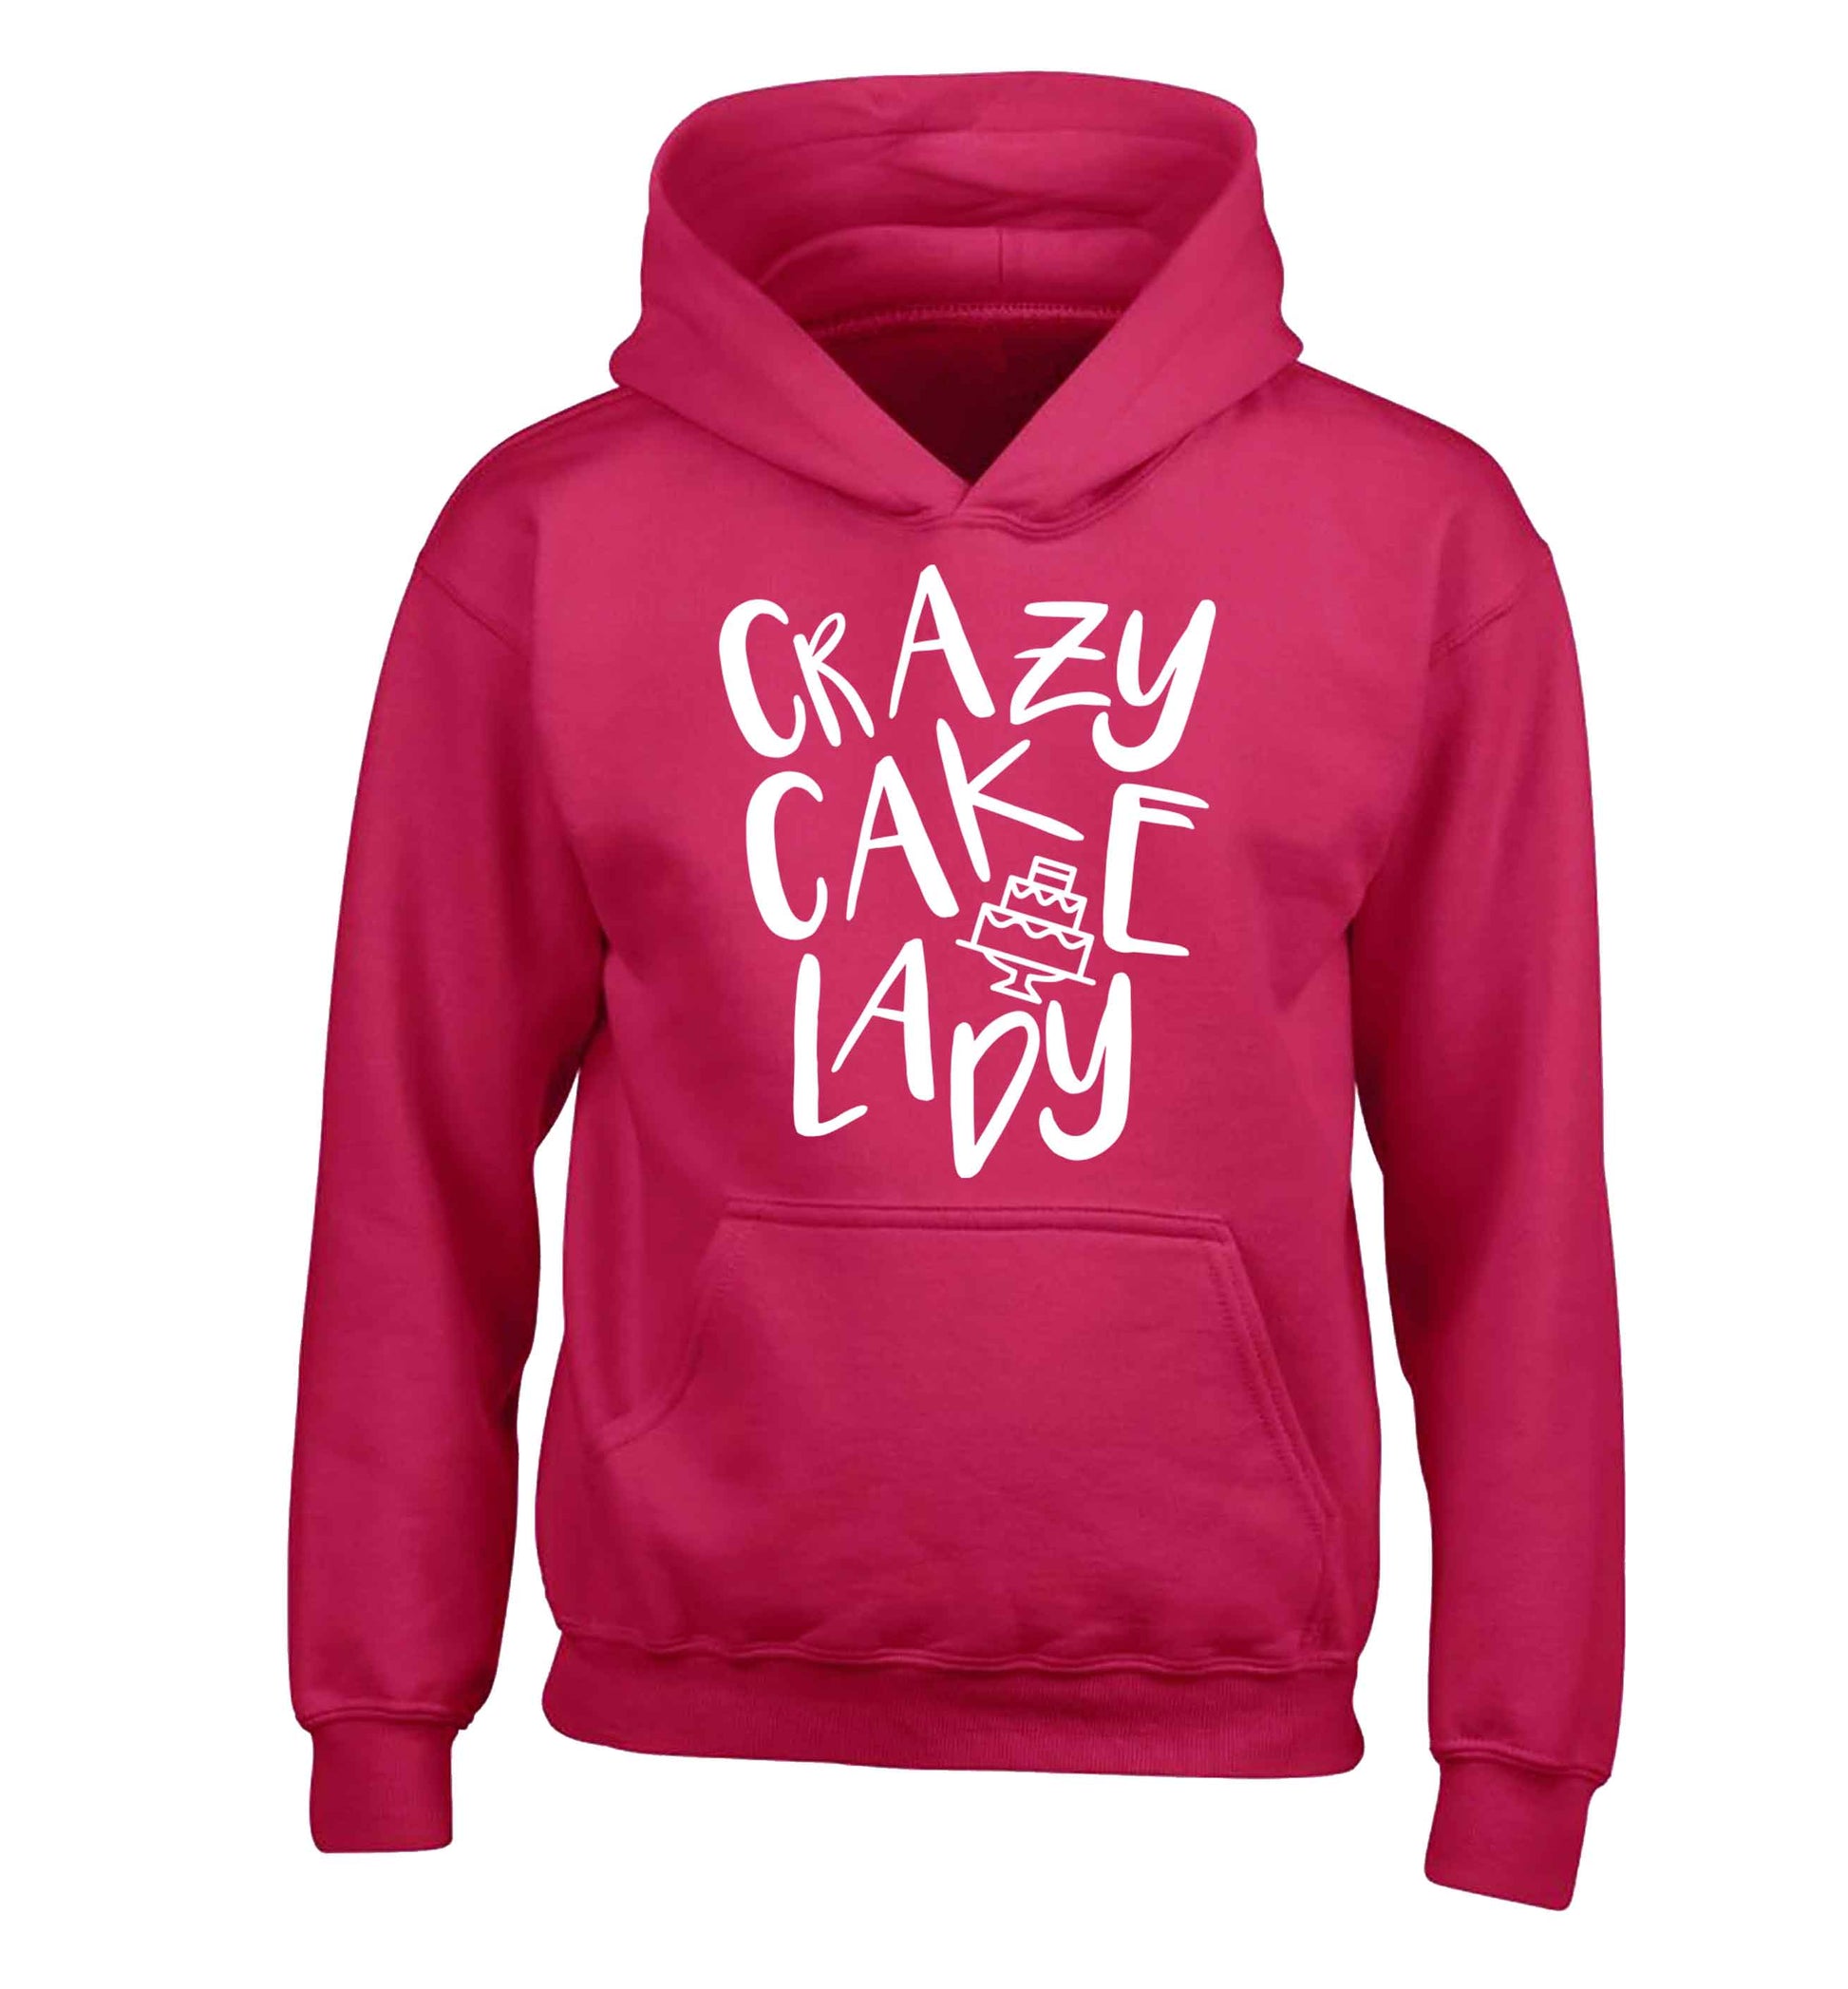 Crazy cake lady children's pink hoodie 12-13 Years